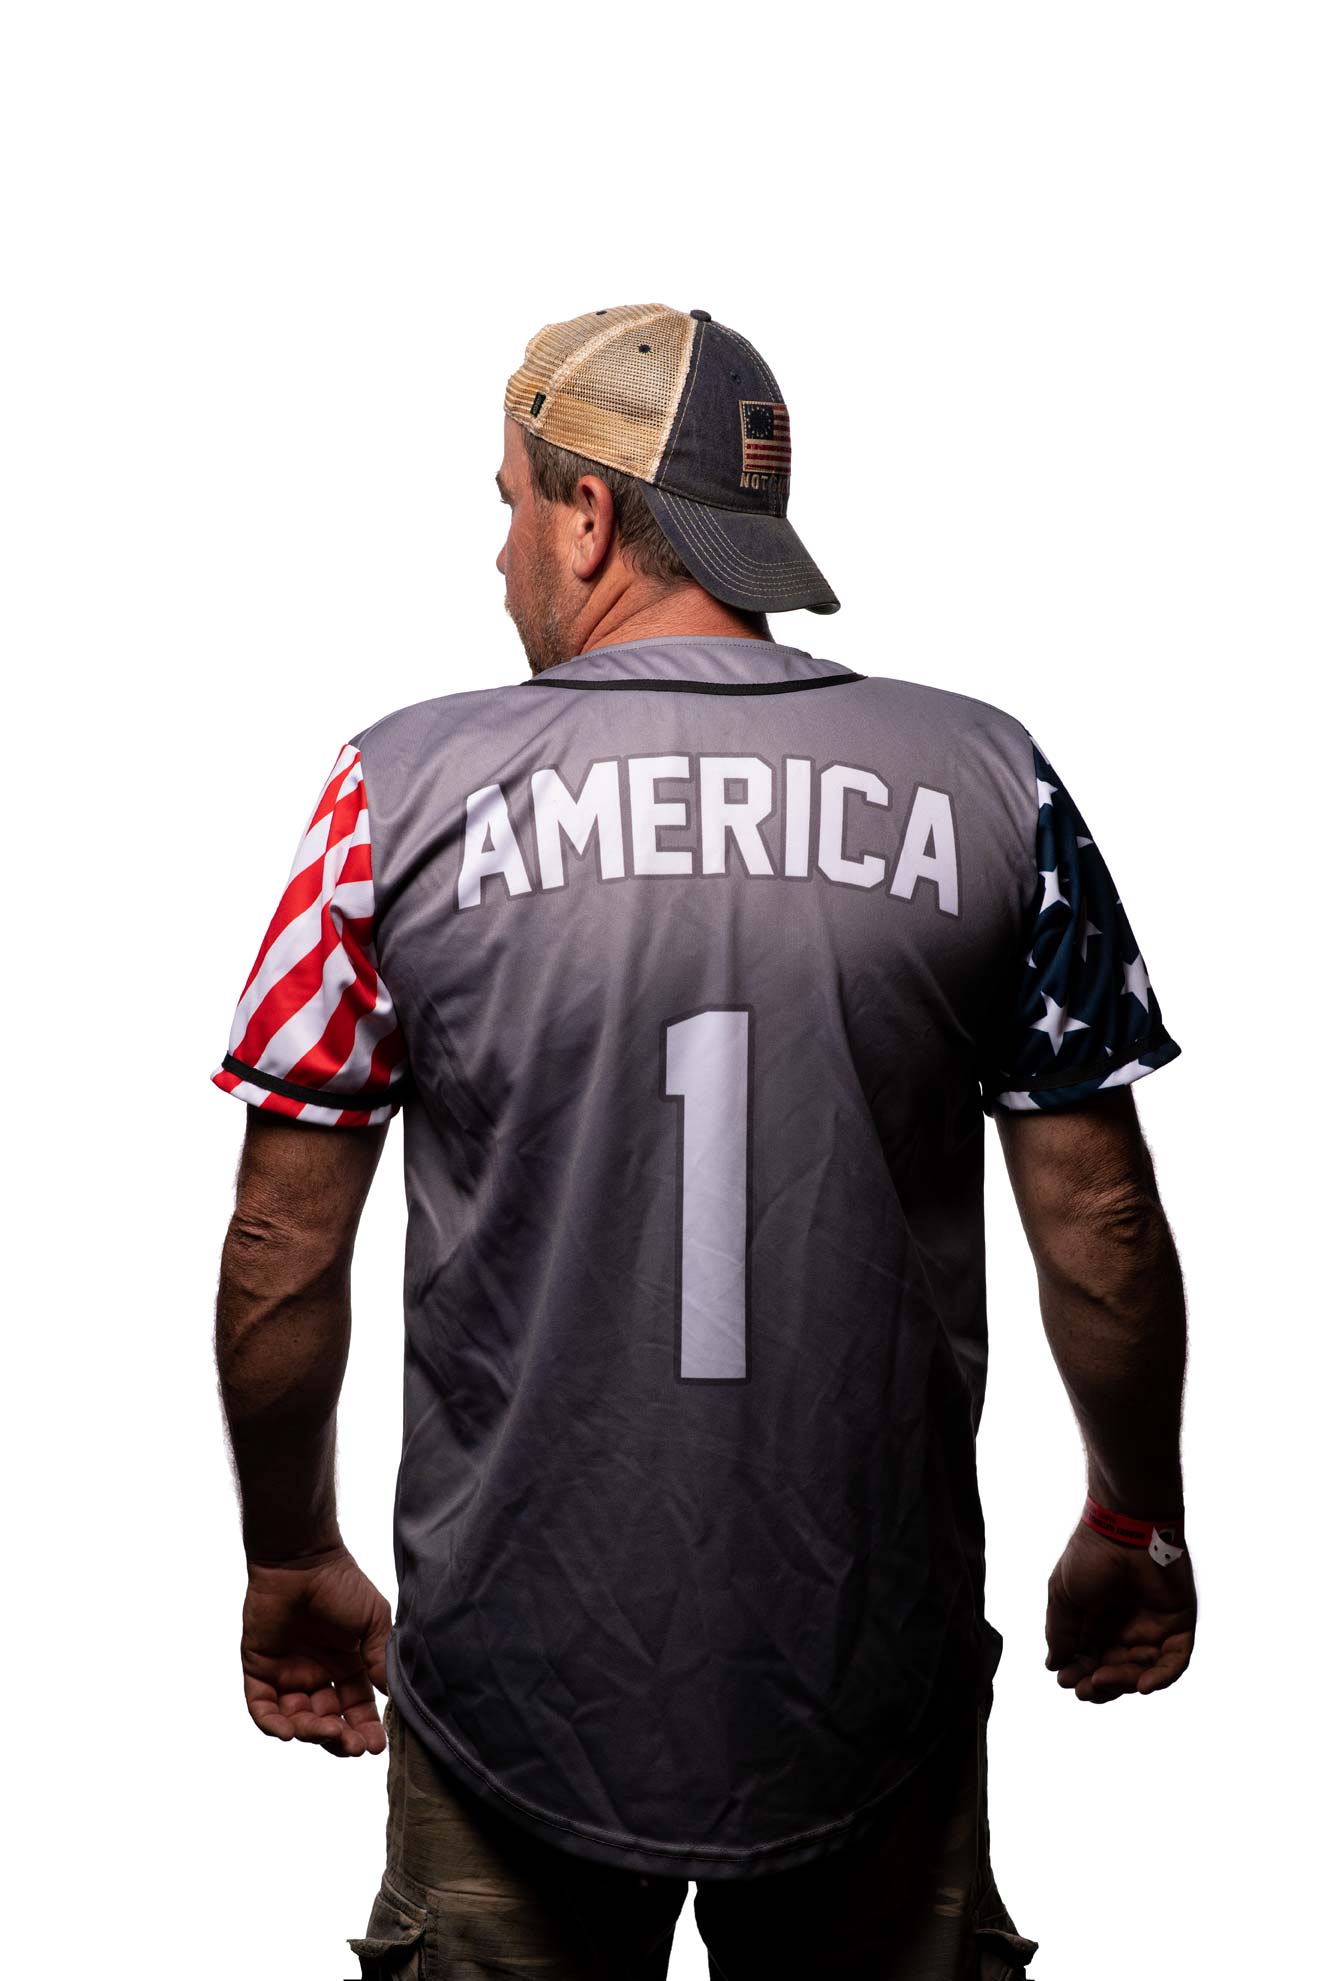 National Trailfest: A portrait of race attendee Shane with his America jersey